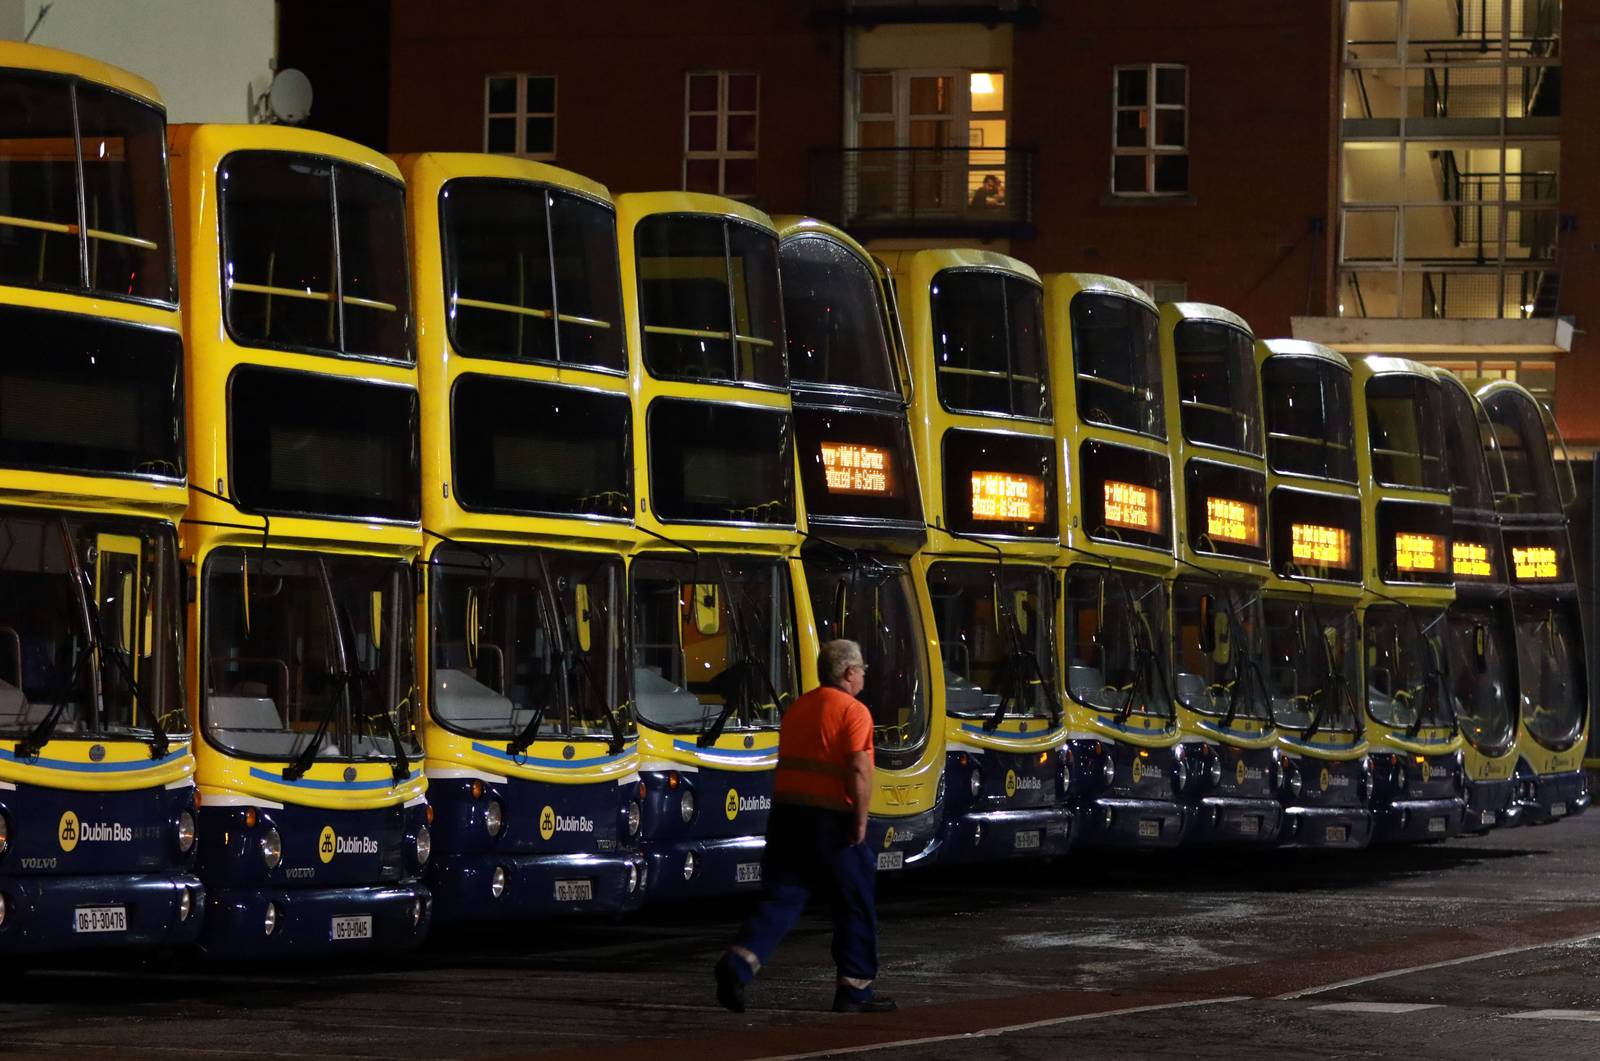 07/09/2016 - NEWS - Image from the Ringsend Bus Garage this evening as services were suspended and busses returned to the depot Dublin Bus Stock . Photograph Nick Bradshaw